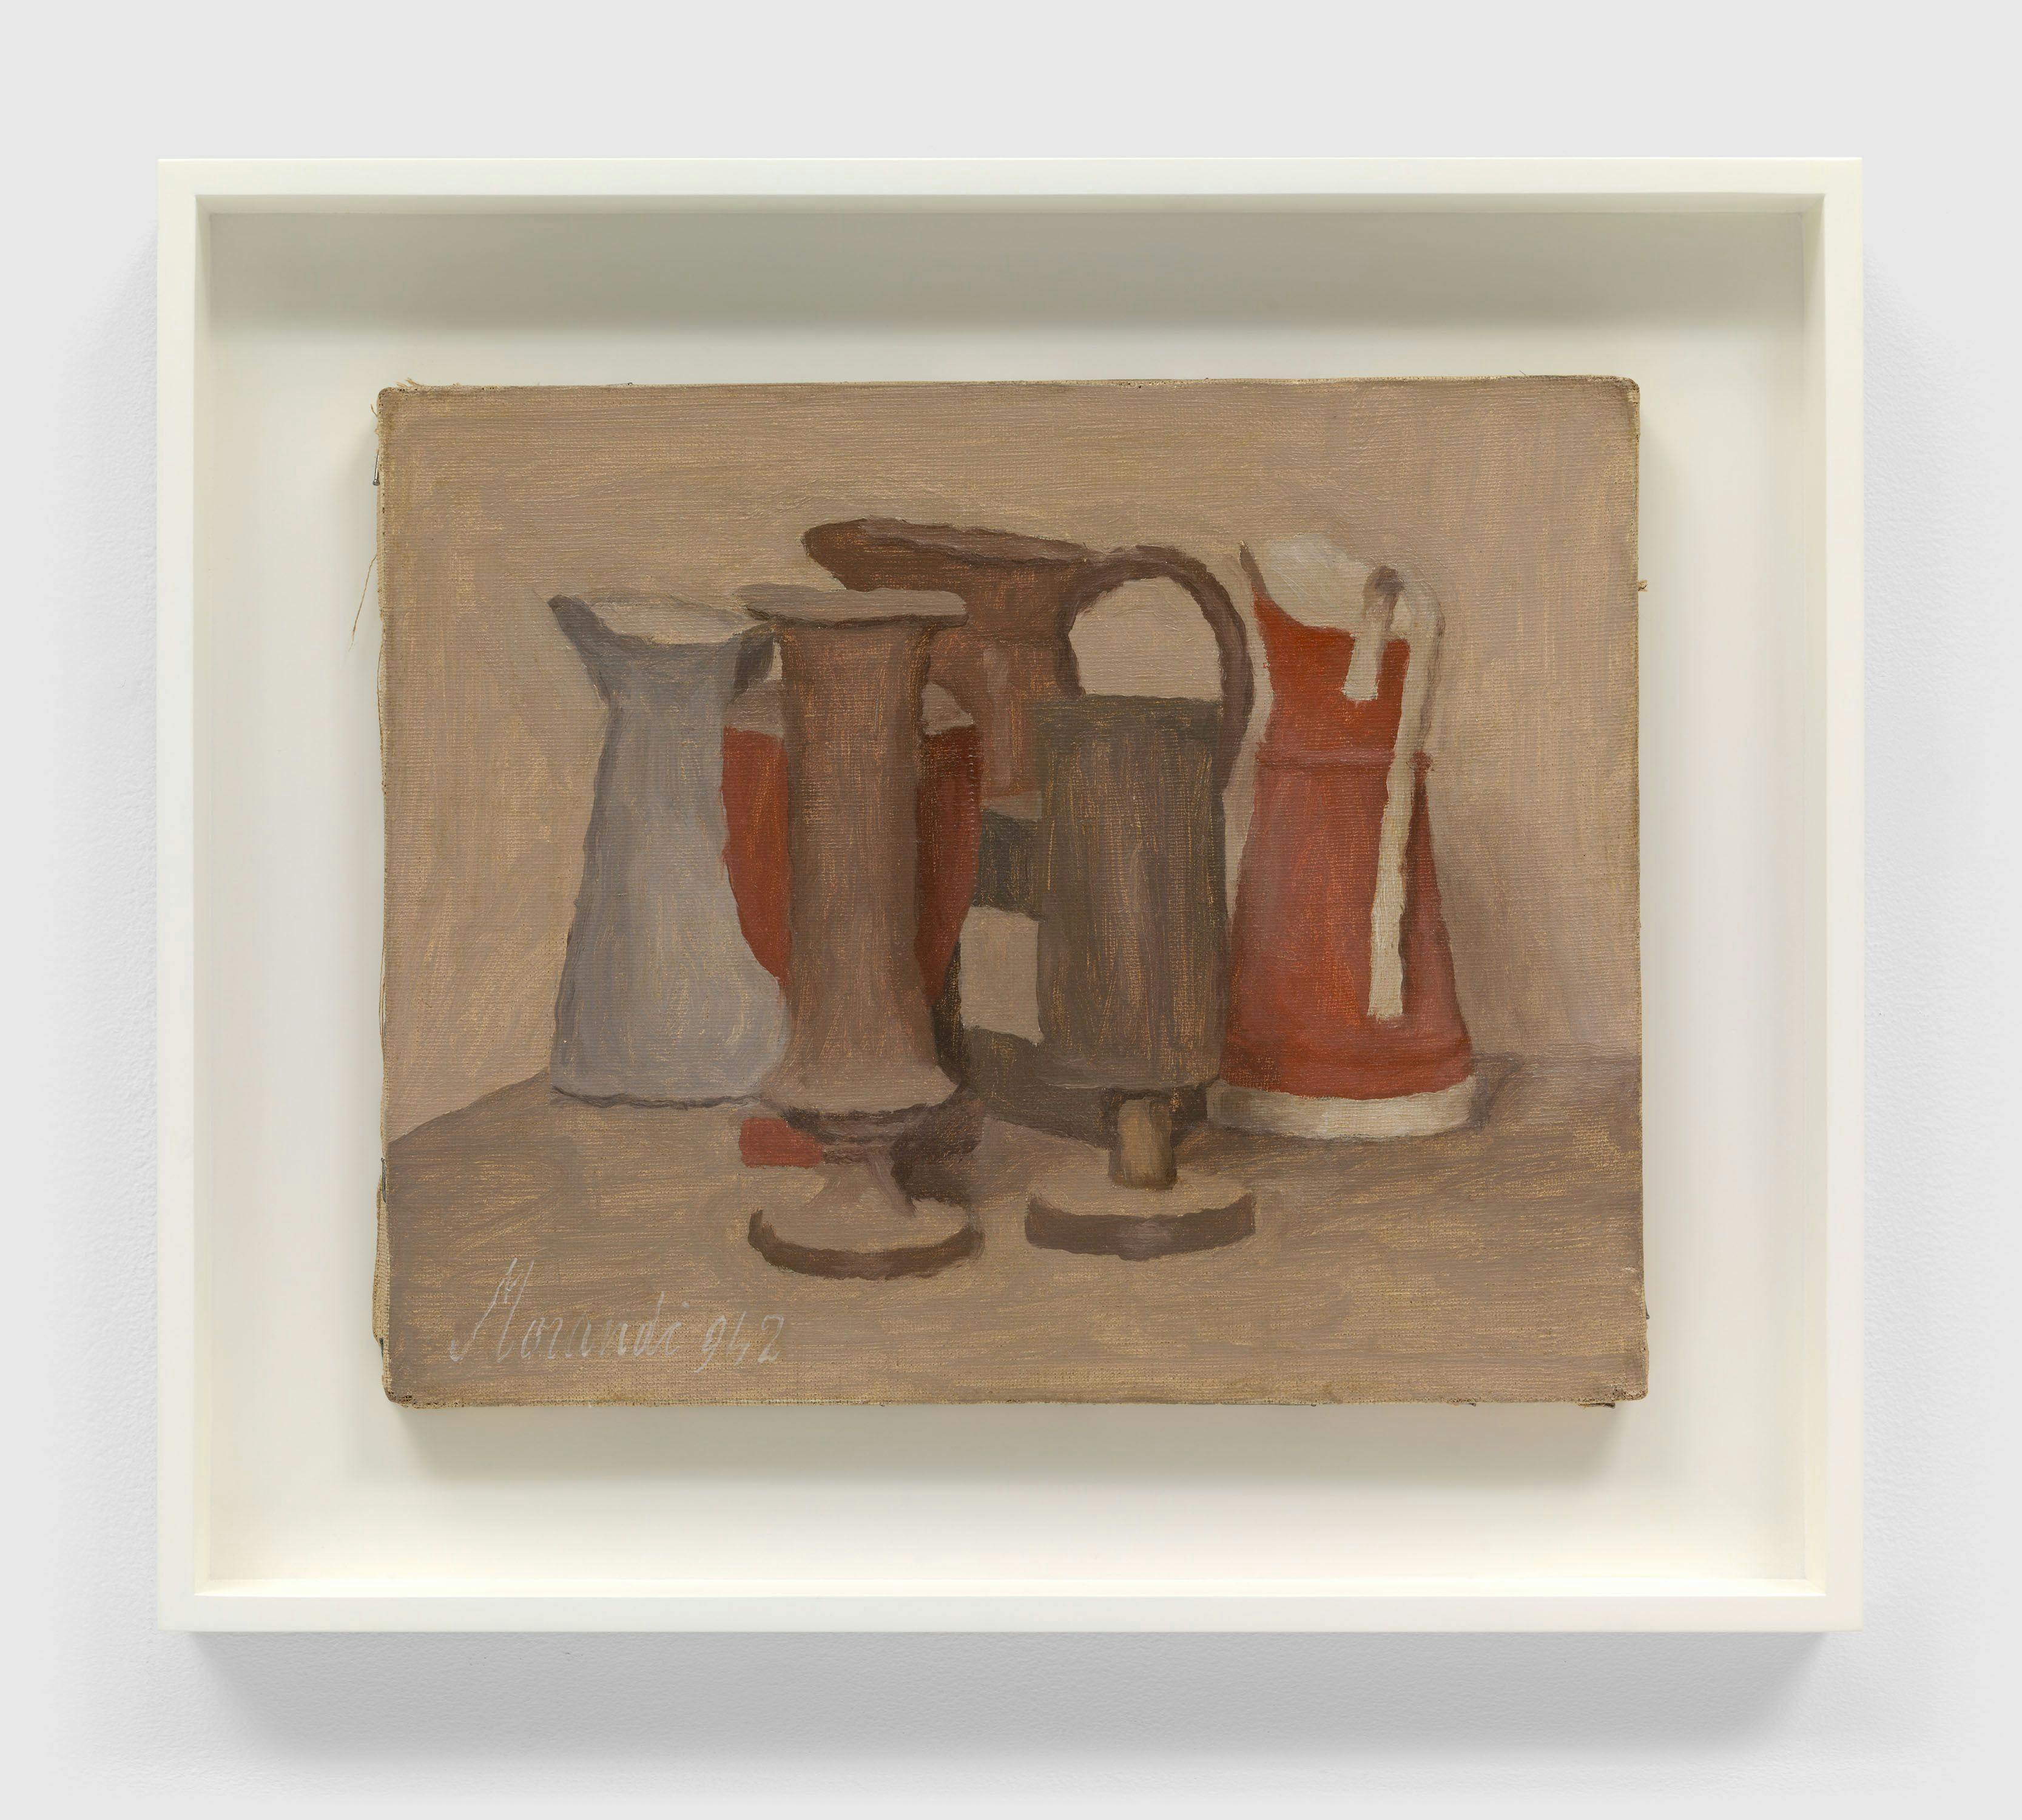 A painting by Giorgio Morandi, titled Natura morta, dated 1942.